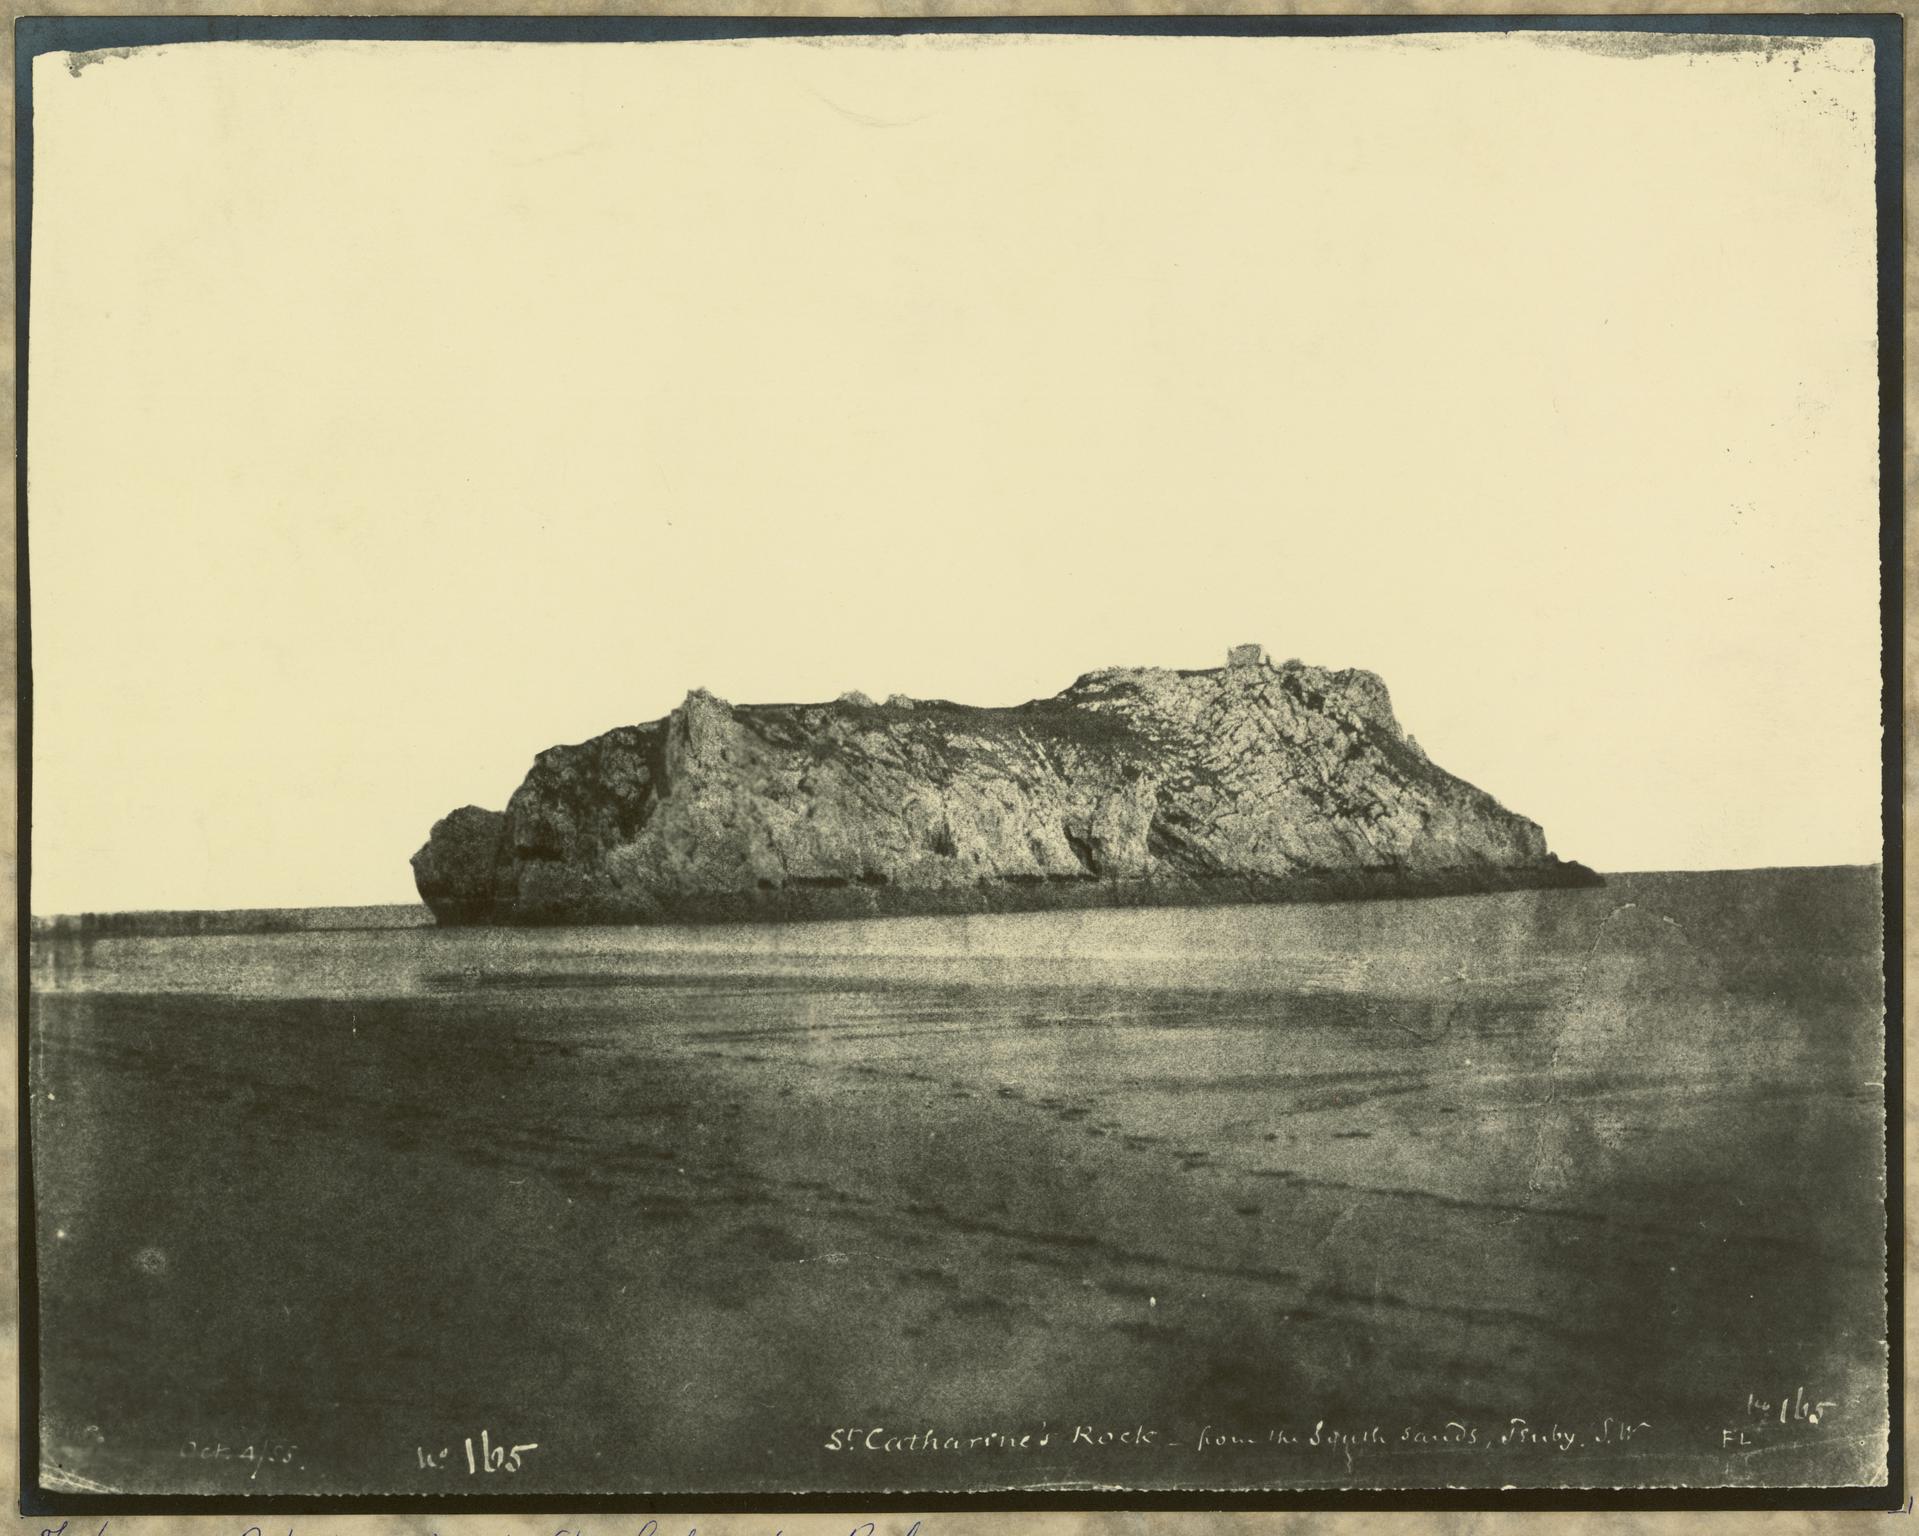 St. Catharine's Rock - From the south sands, Tenby, S.W